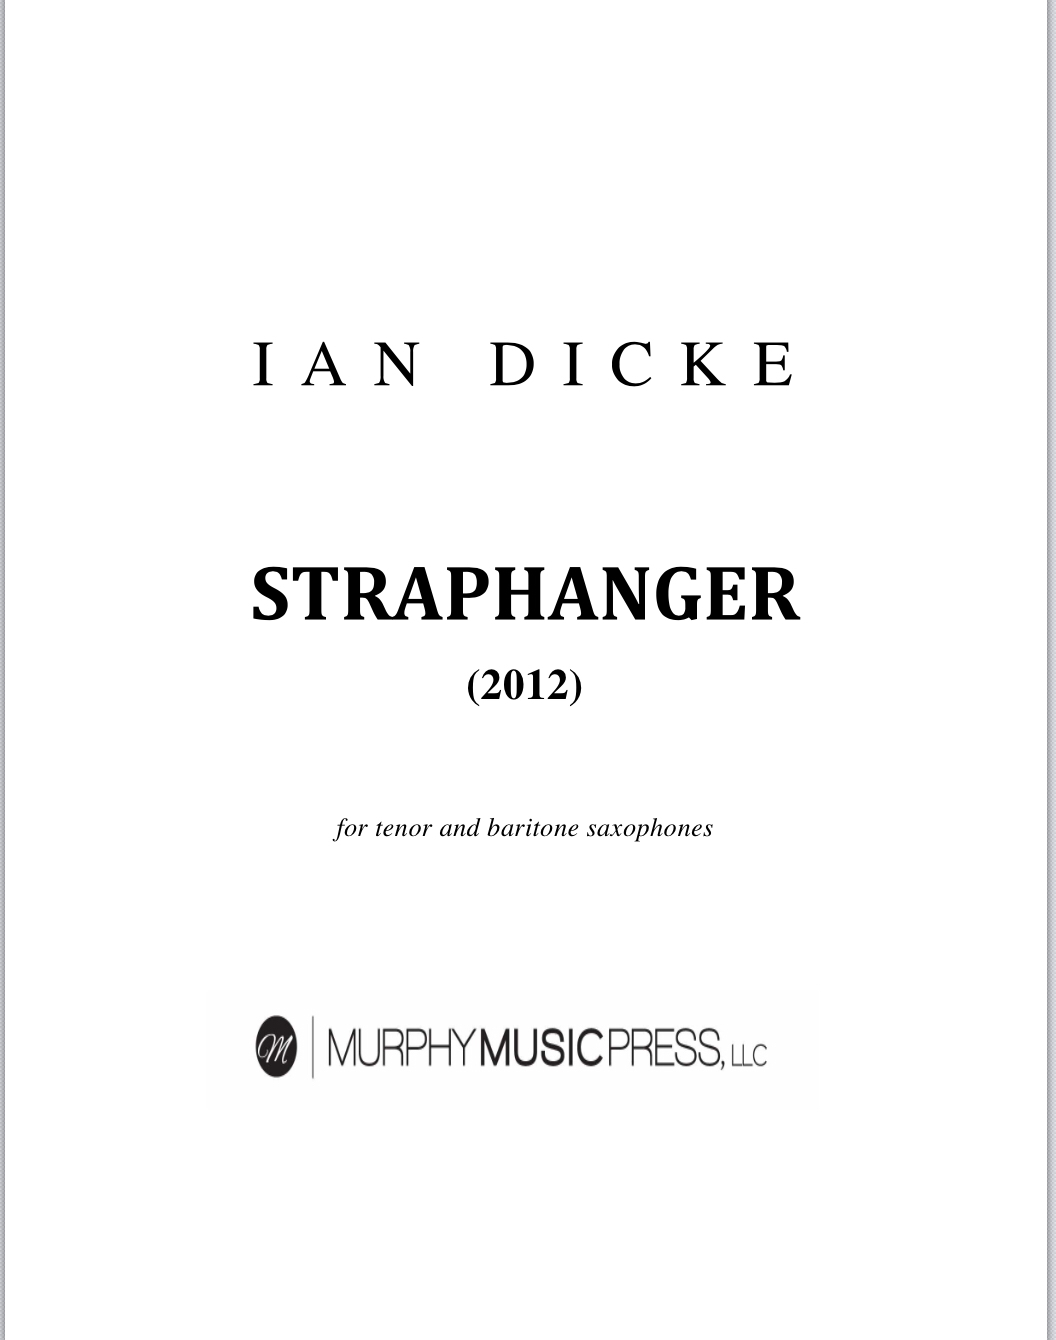 Straphanger For Tenor And Baritone Saxophones by Ian Dicke